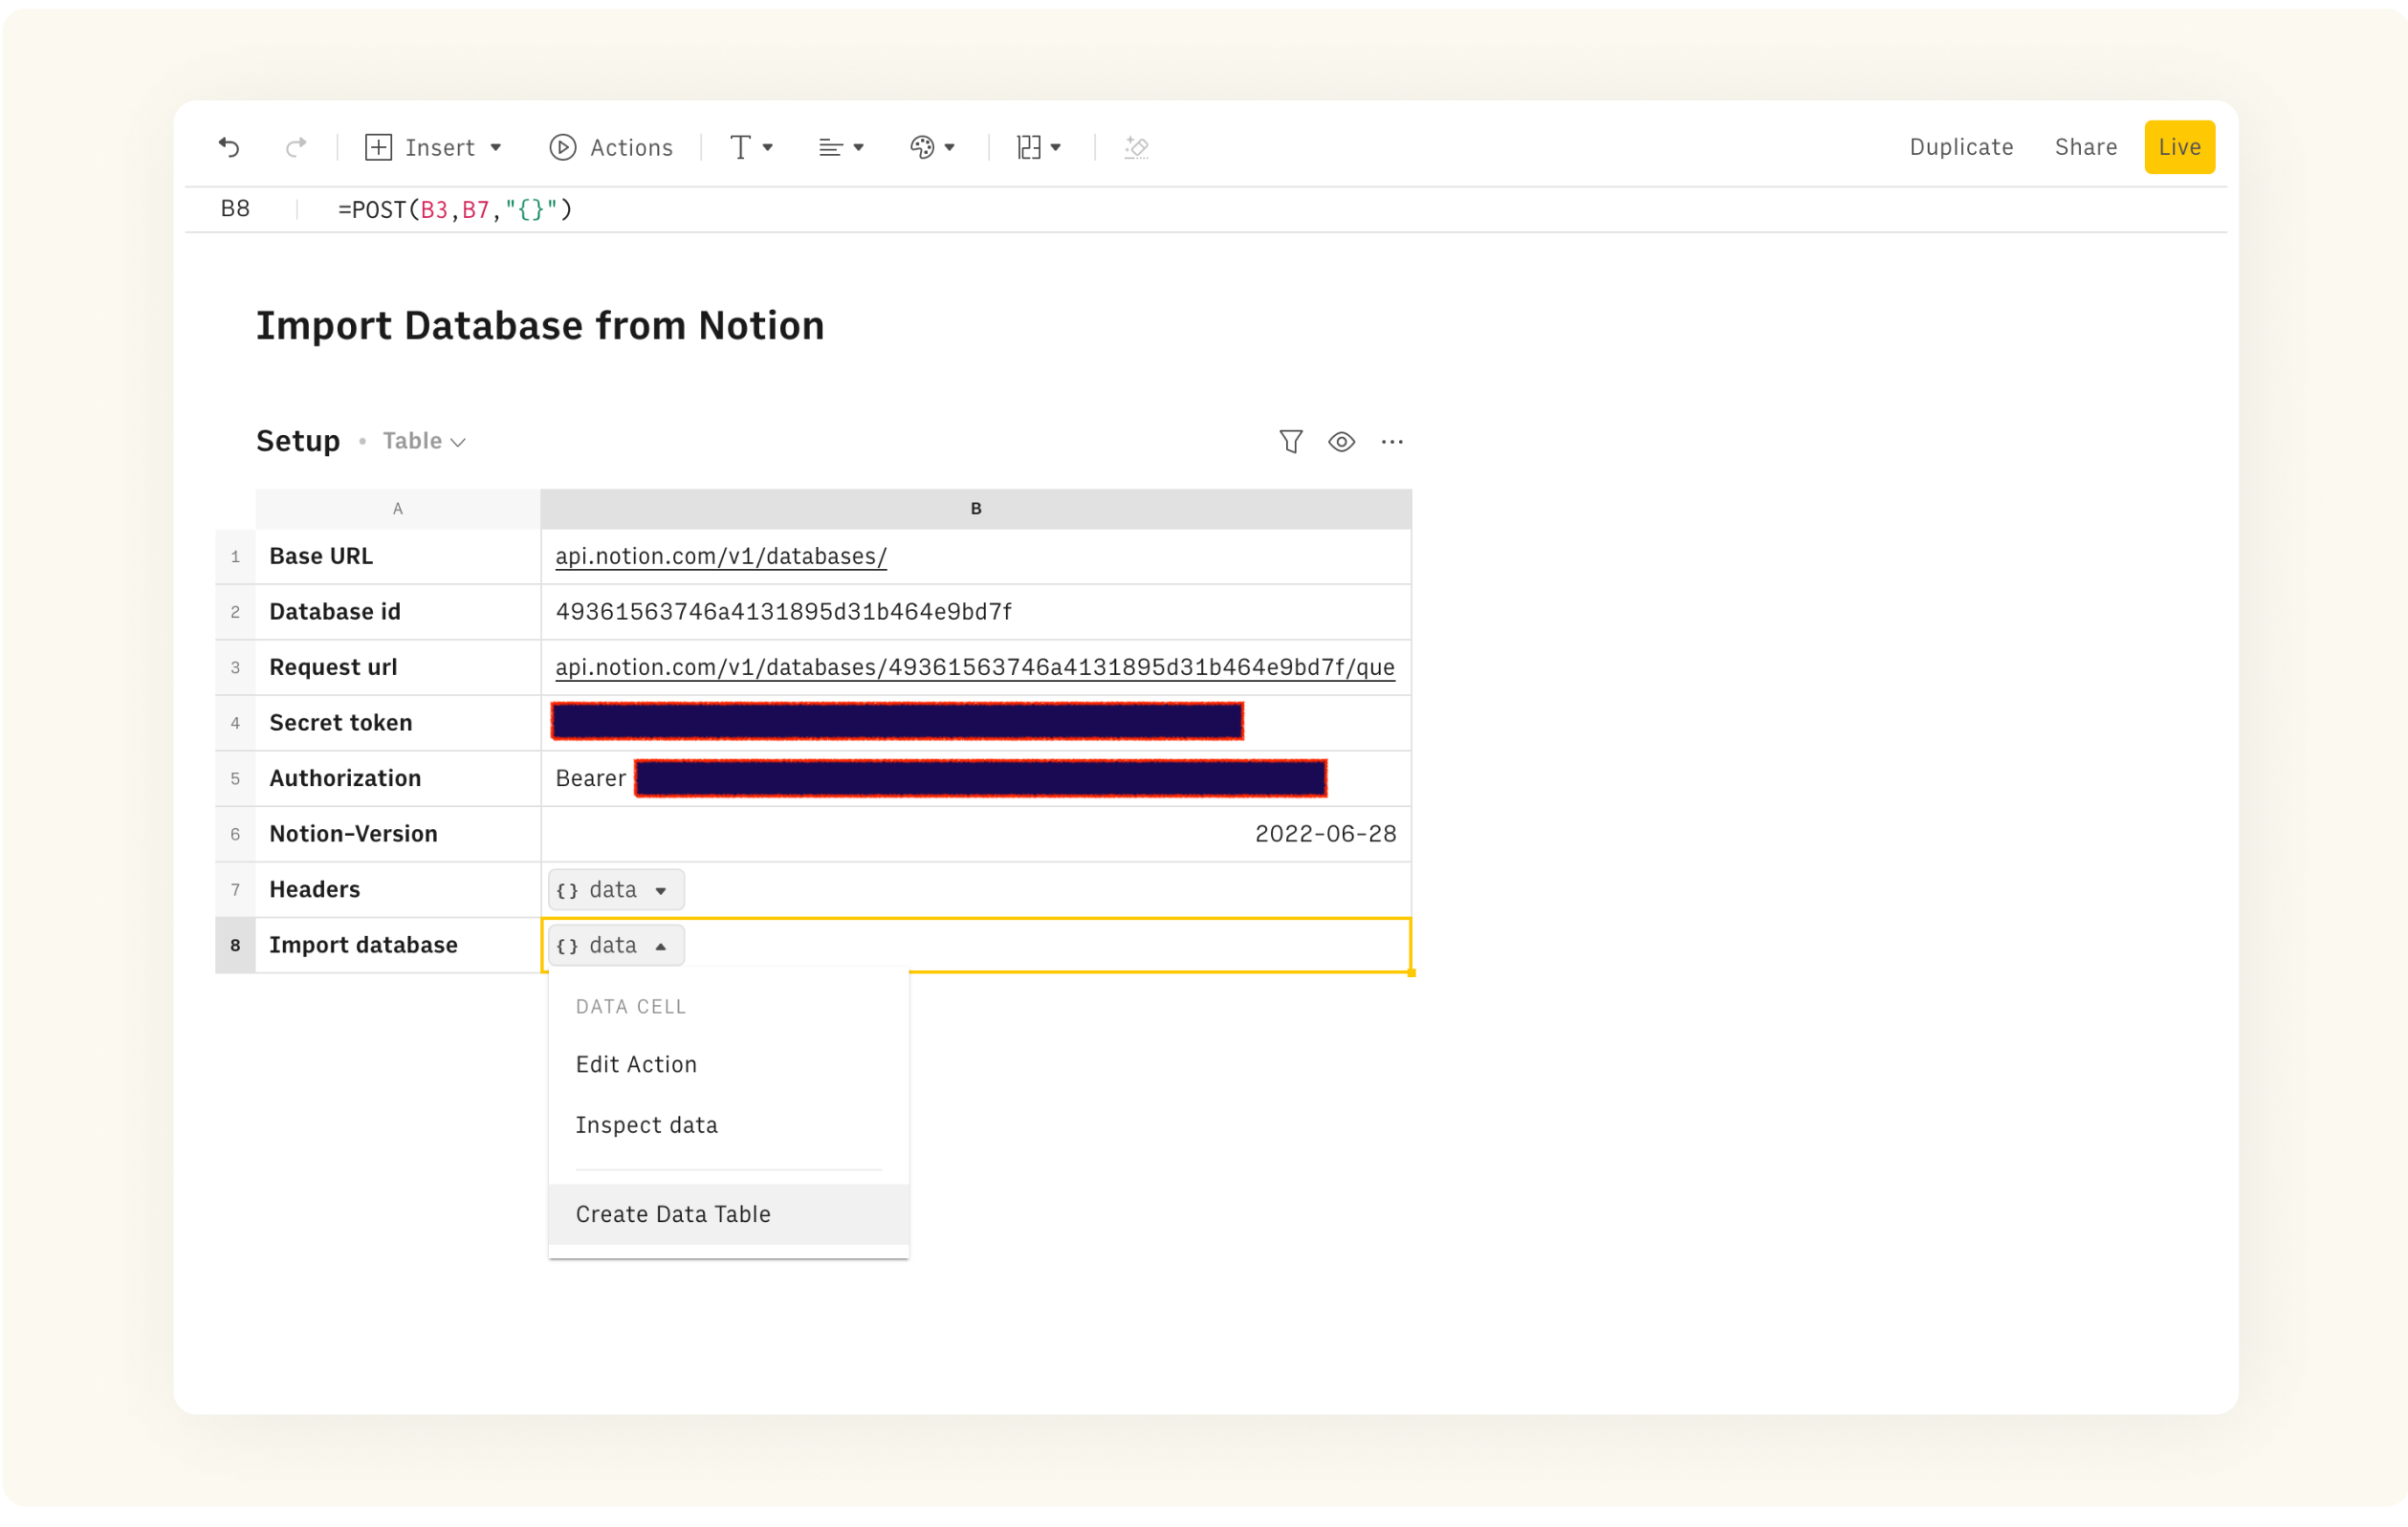 Create Data Table action